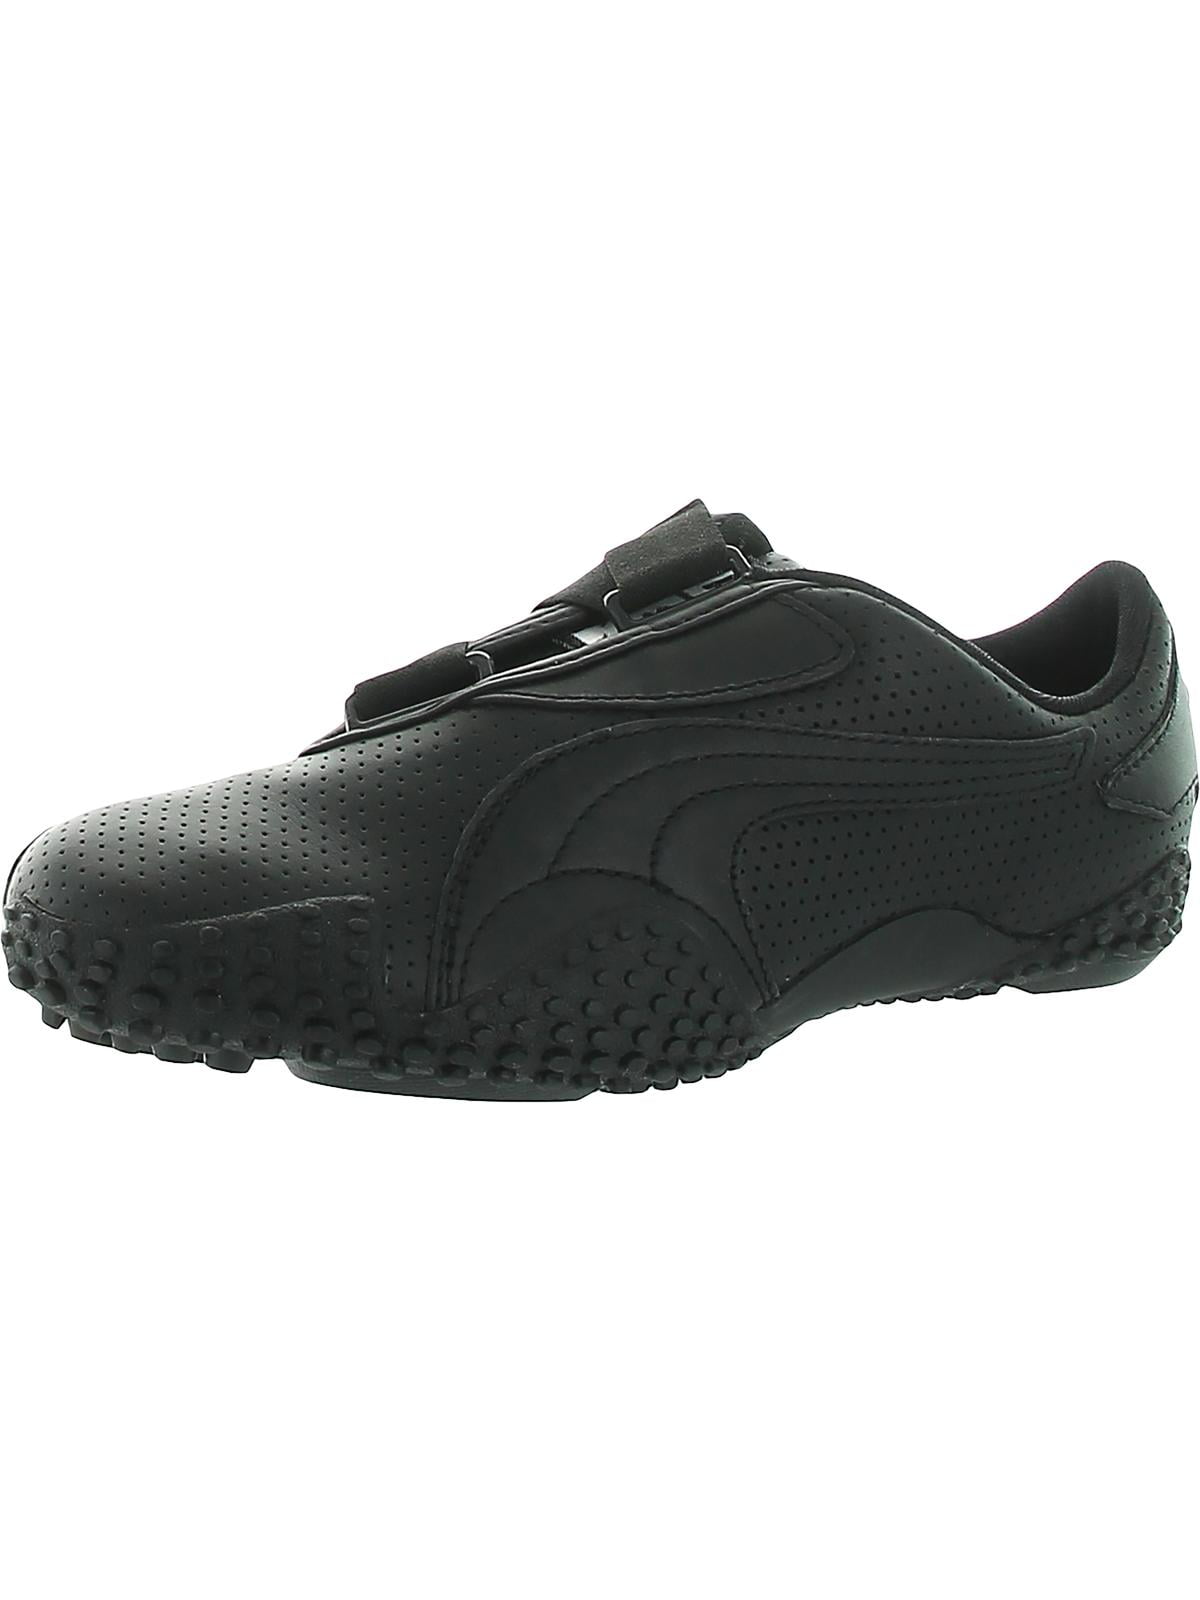 puma mostro perforated leather shoes